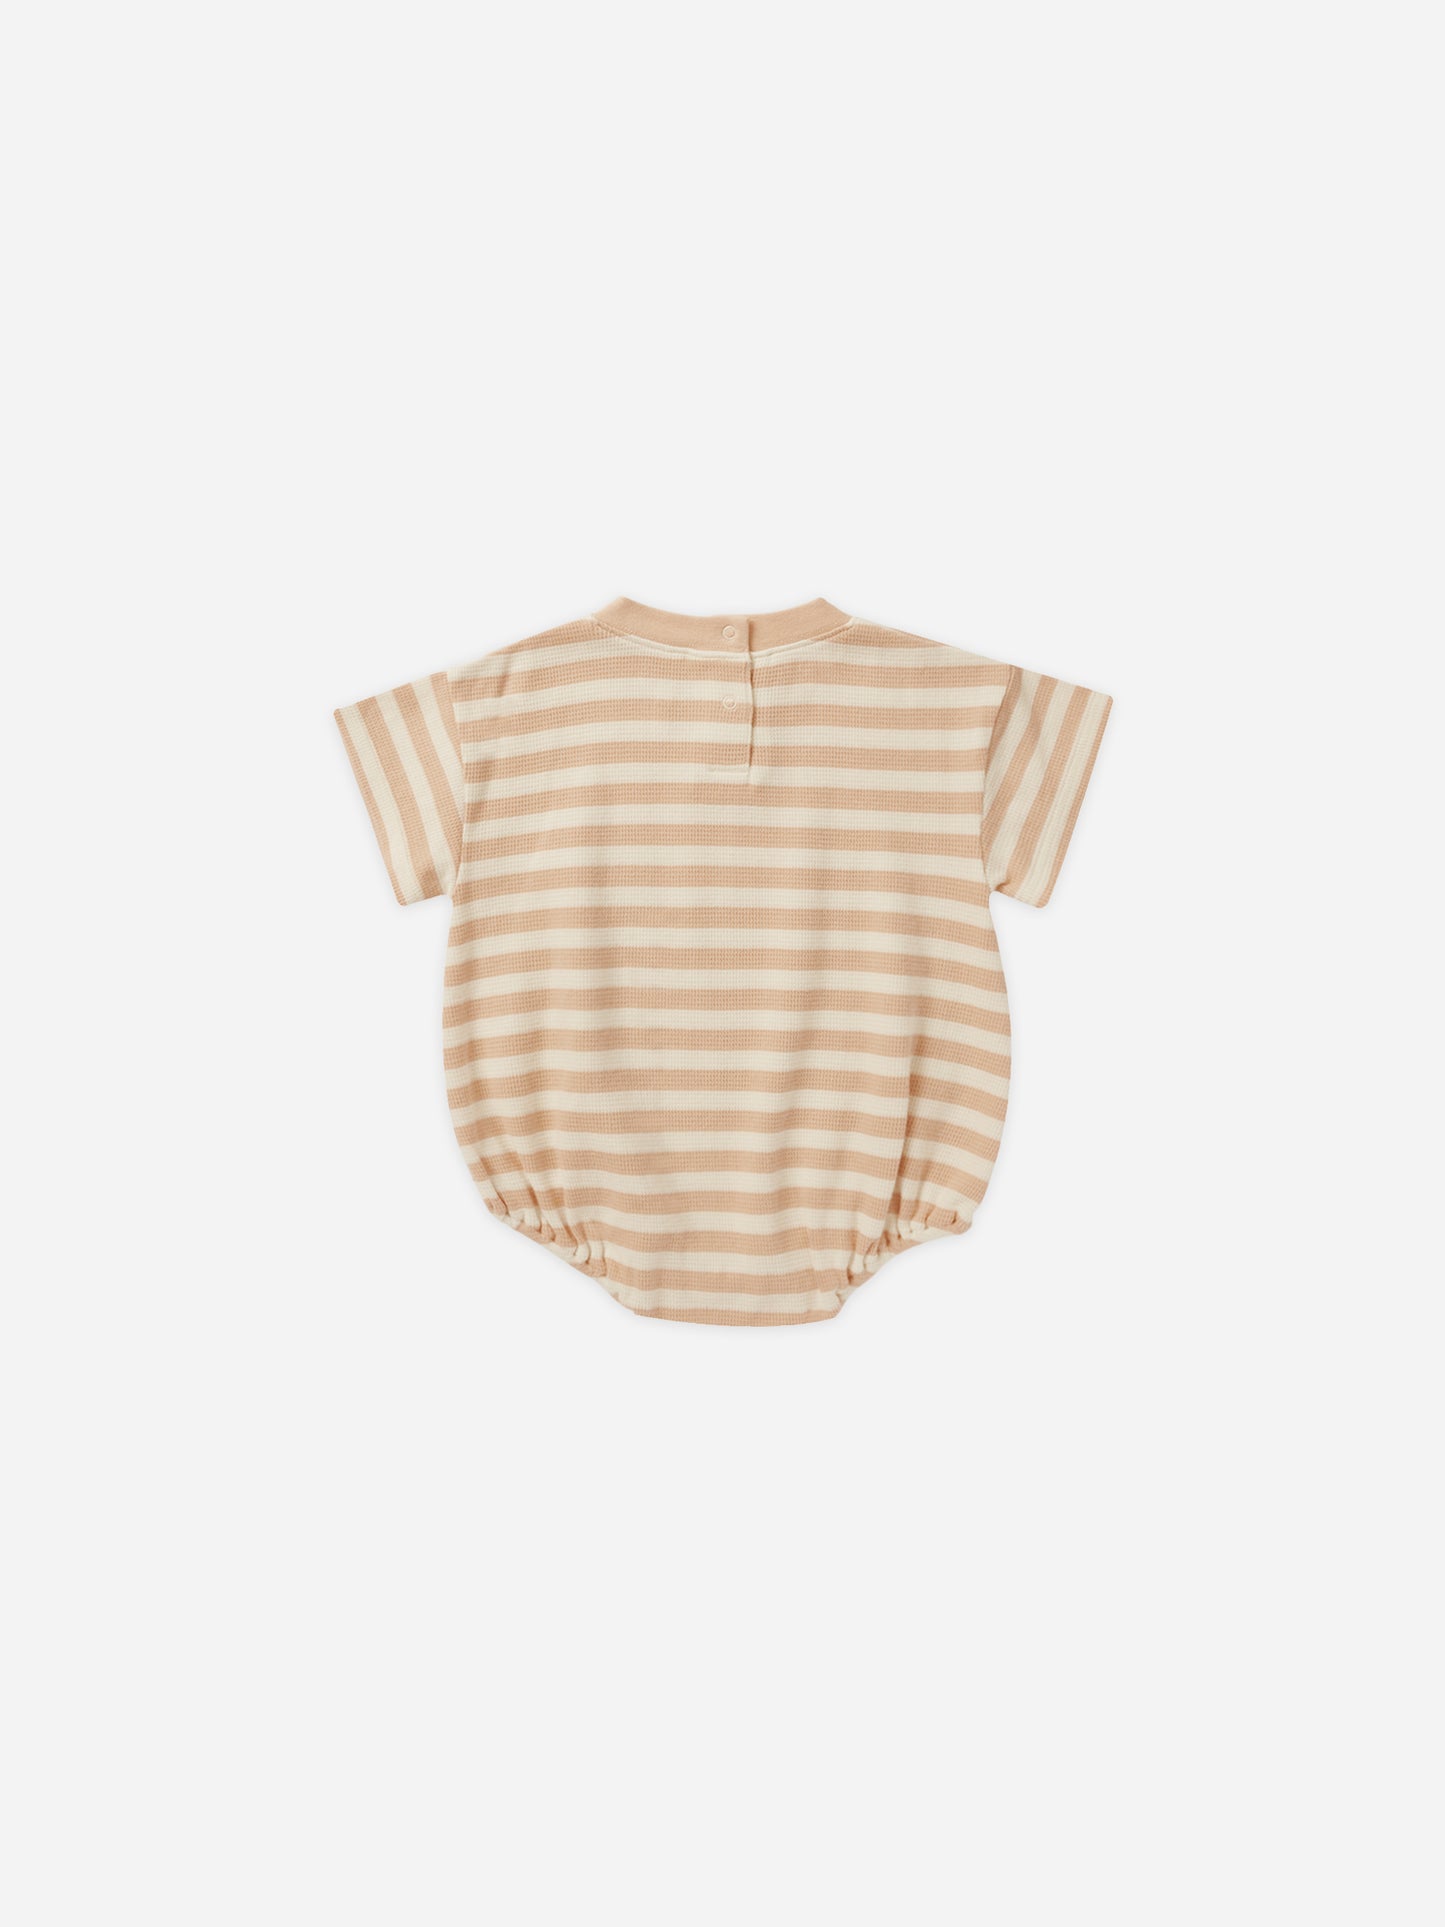 Relaxed Bubble Romper || Apricot Stripe - Rylee + Cru | Kids Clothes | Trendy Baby Clothes | Modern Infant Outfits |